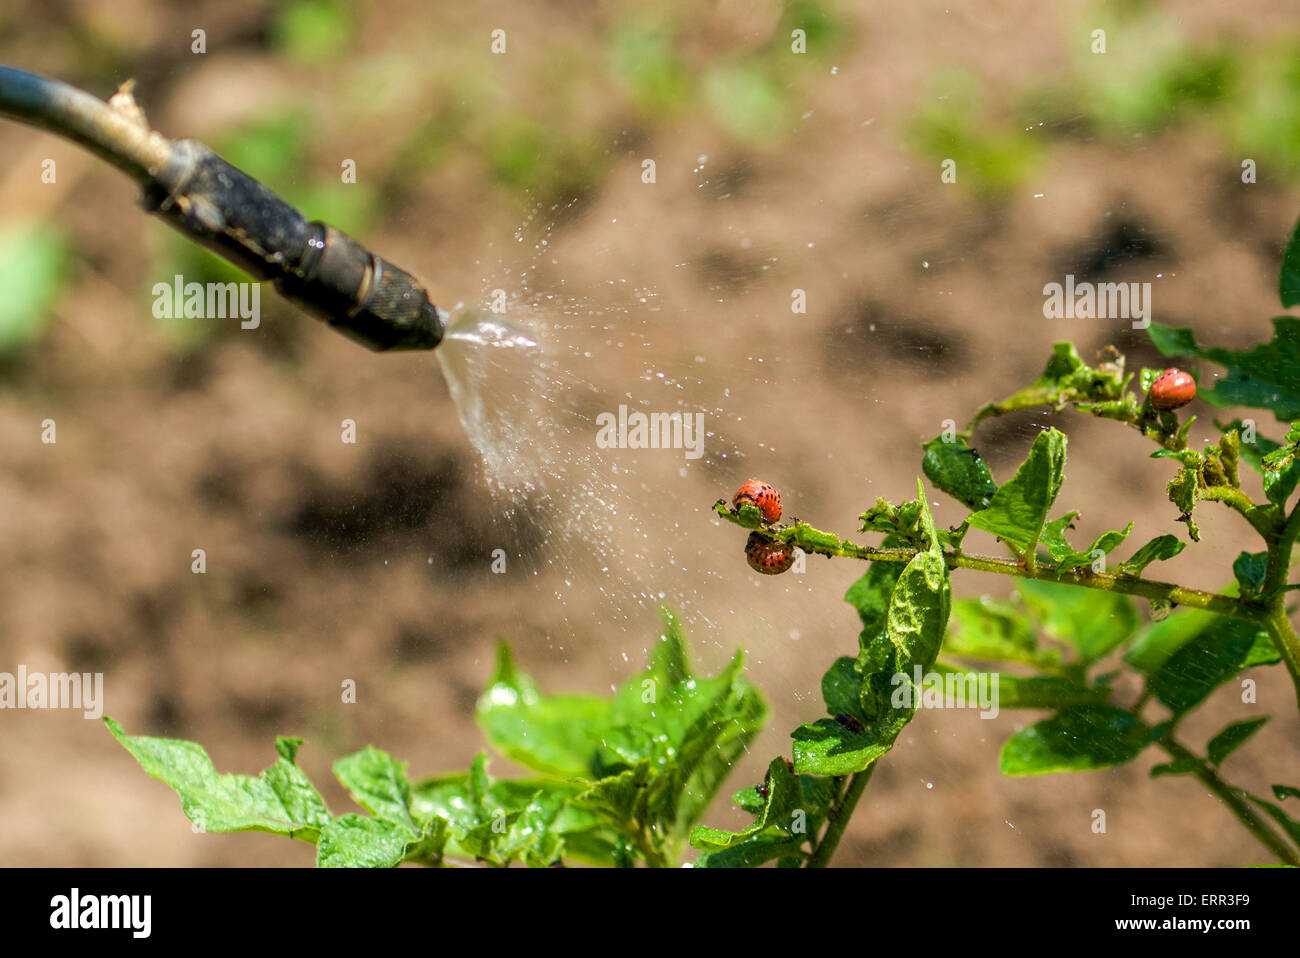 Spraying Insecticide on Colorado Potato Beetle Bug Larvas in Cultivated Vegetable Garden Stock Photo